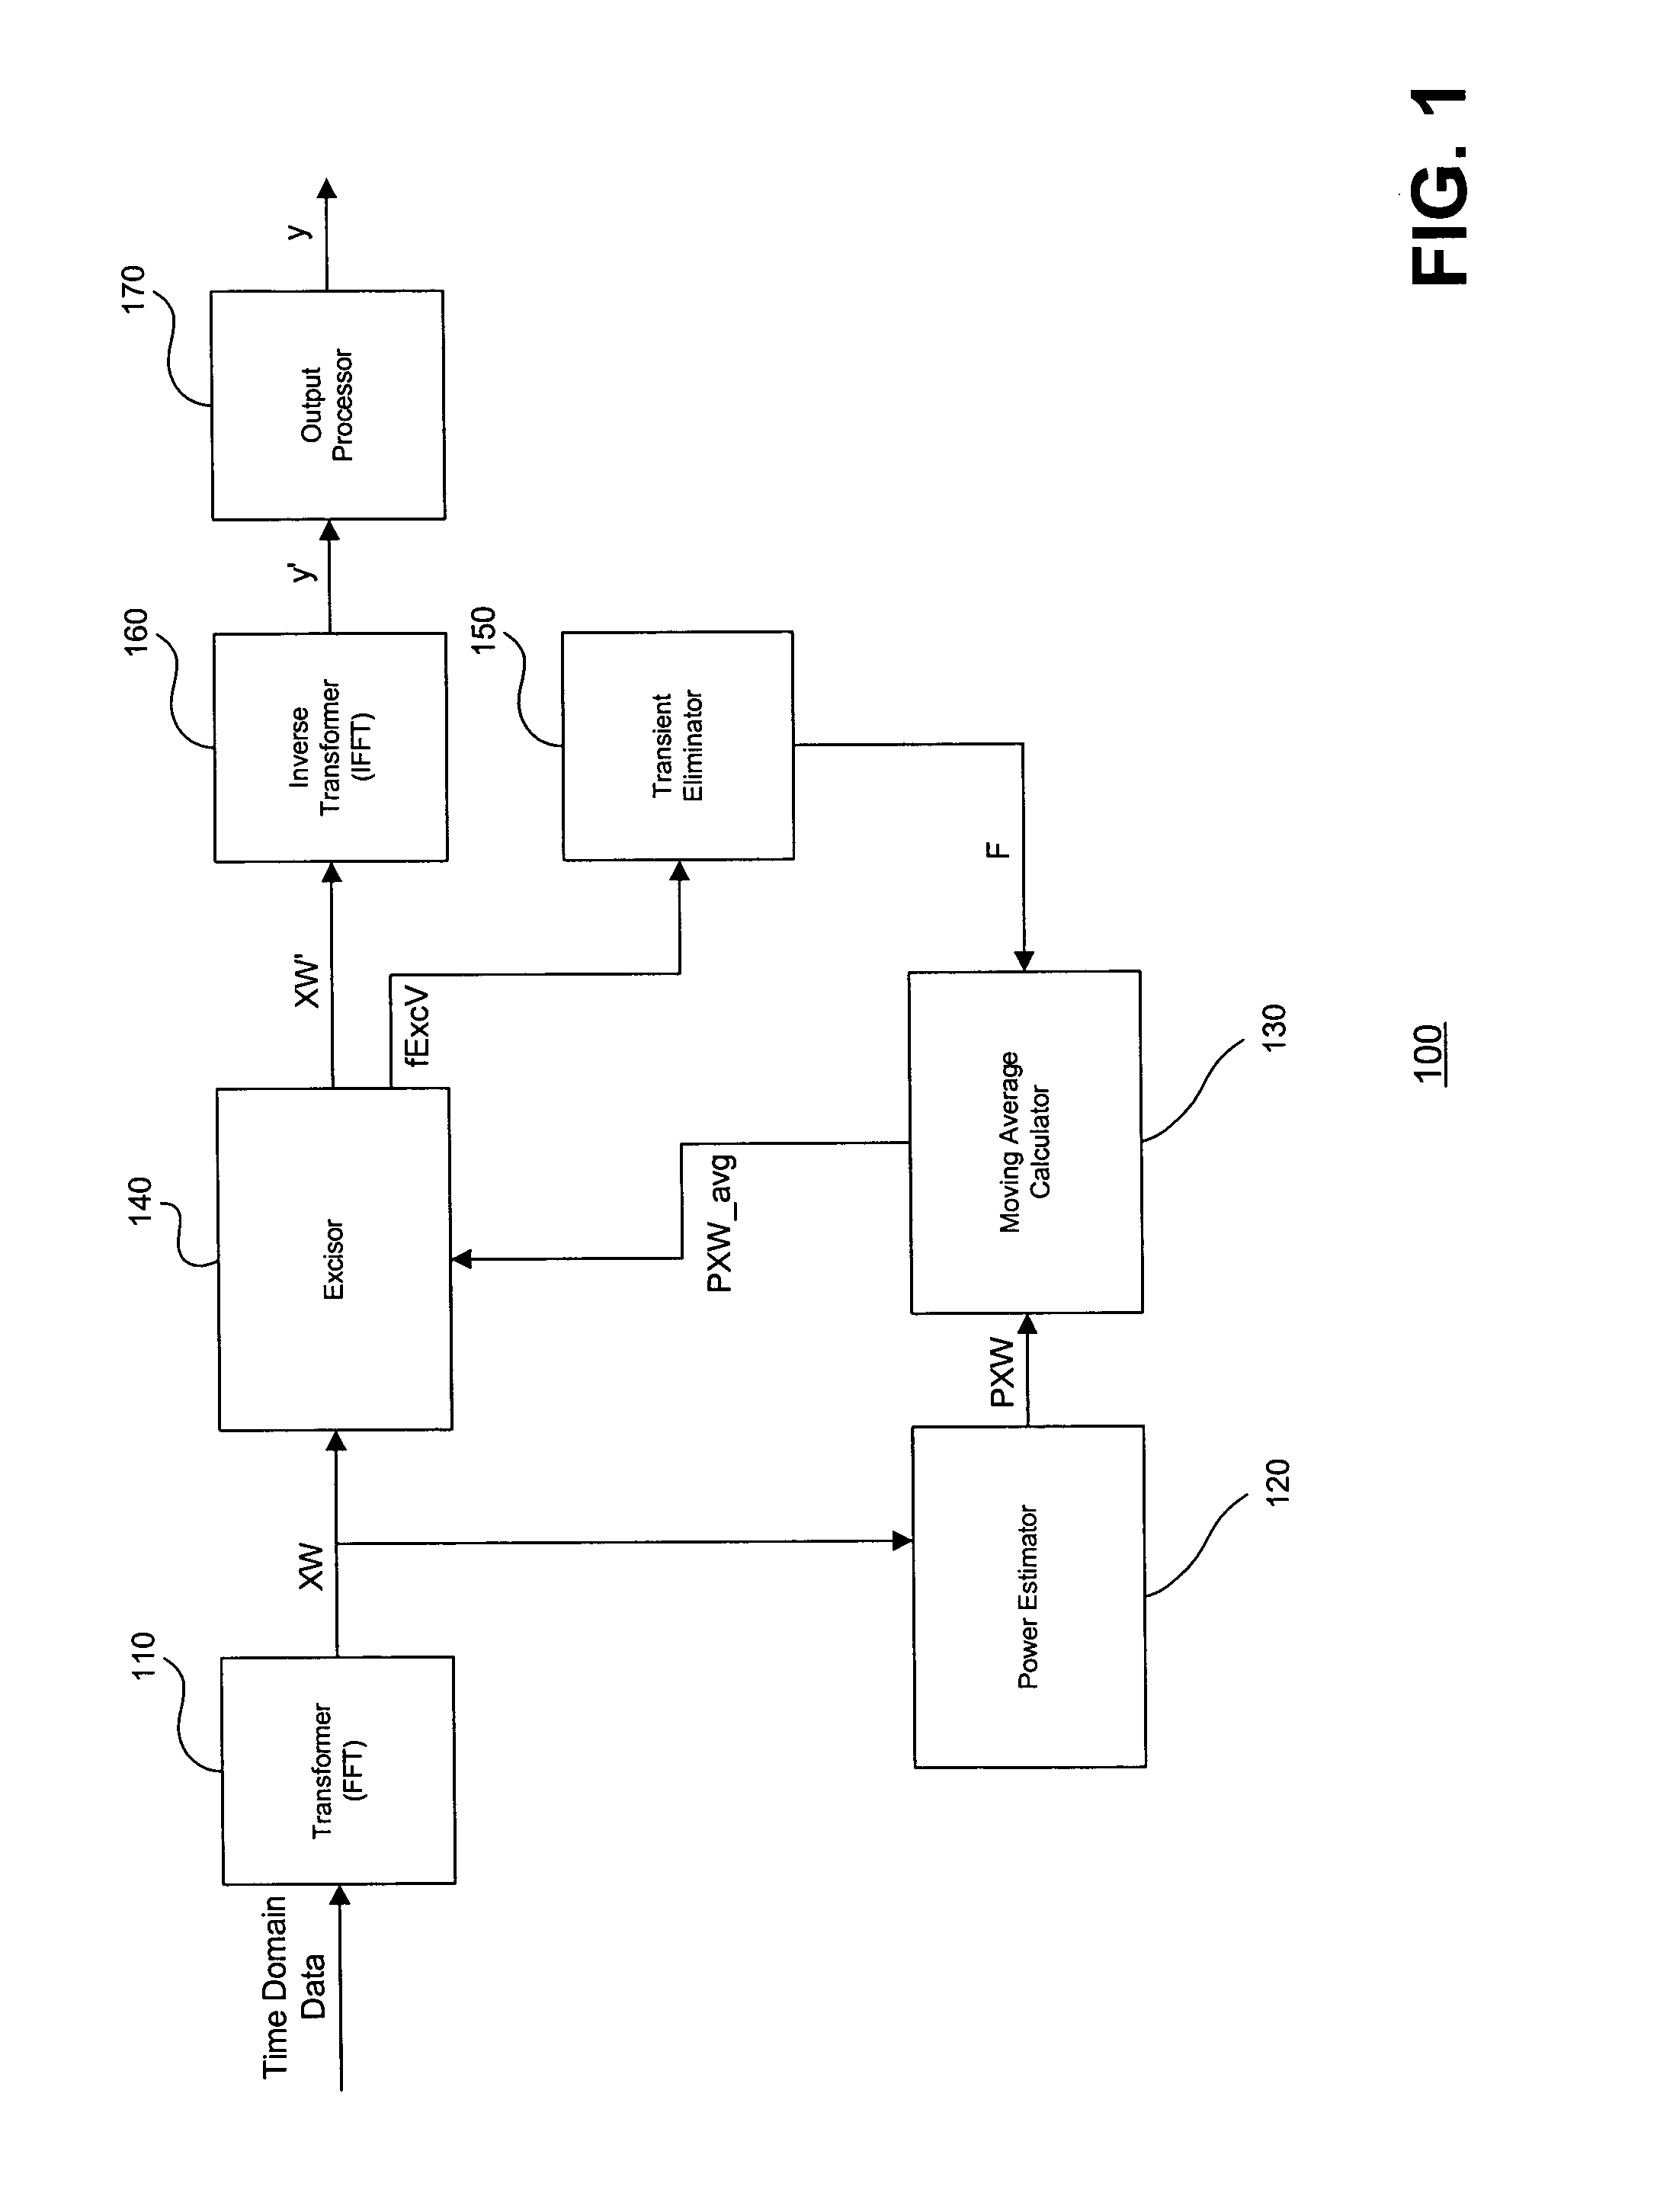 Narrowband interference excision device